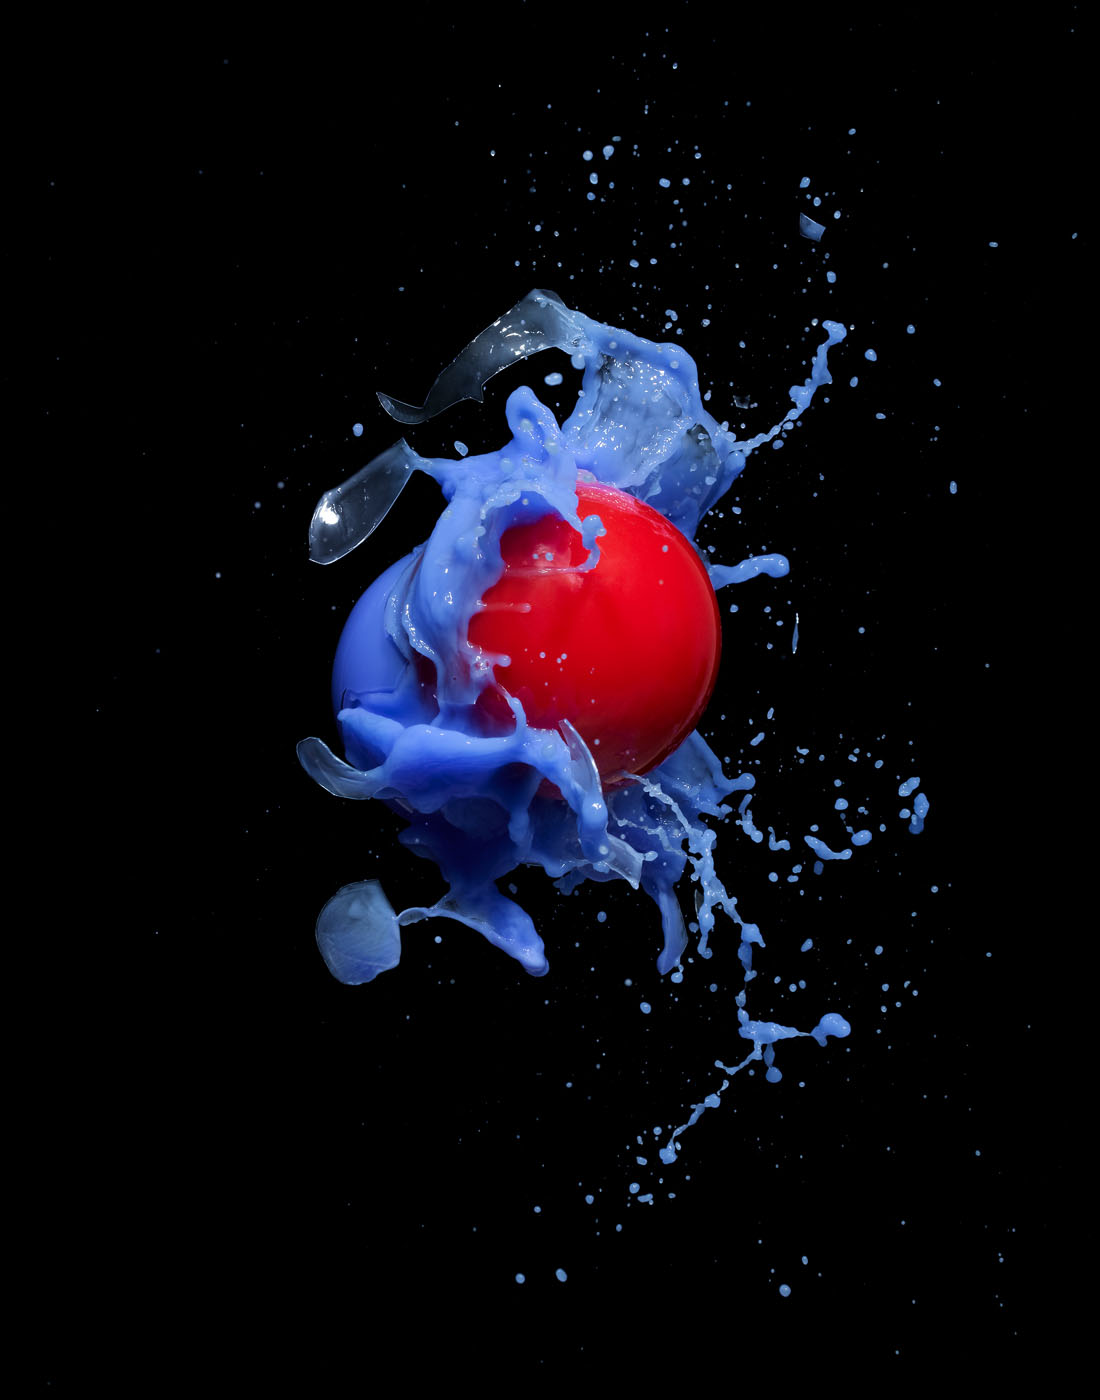 Red and blue balls exploding in photo studio by Alexander Kent London based still life and product photographer.